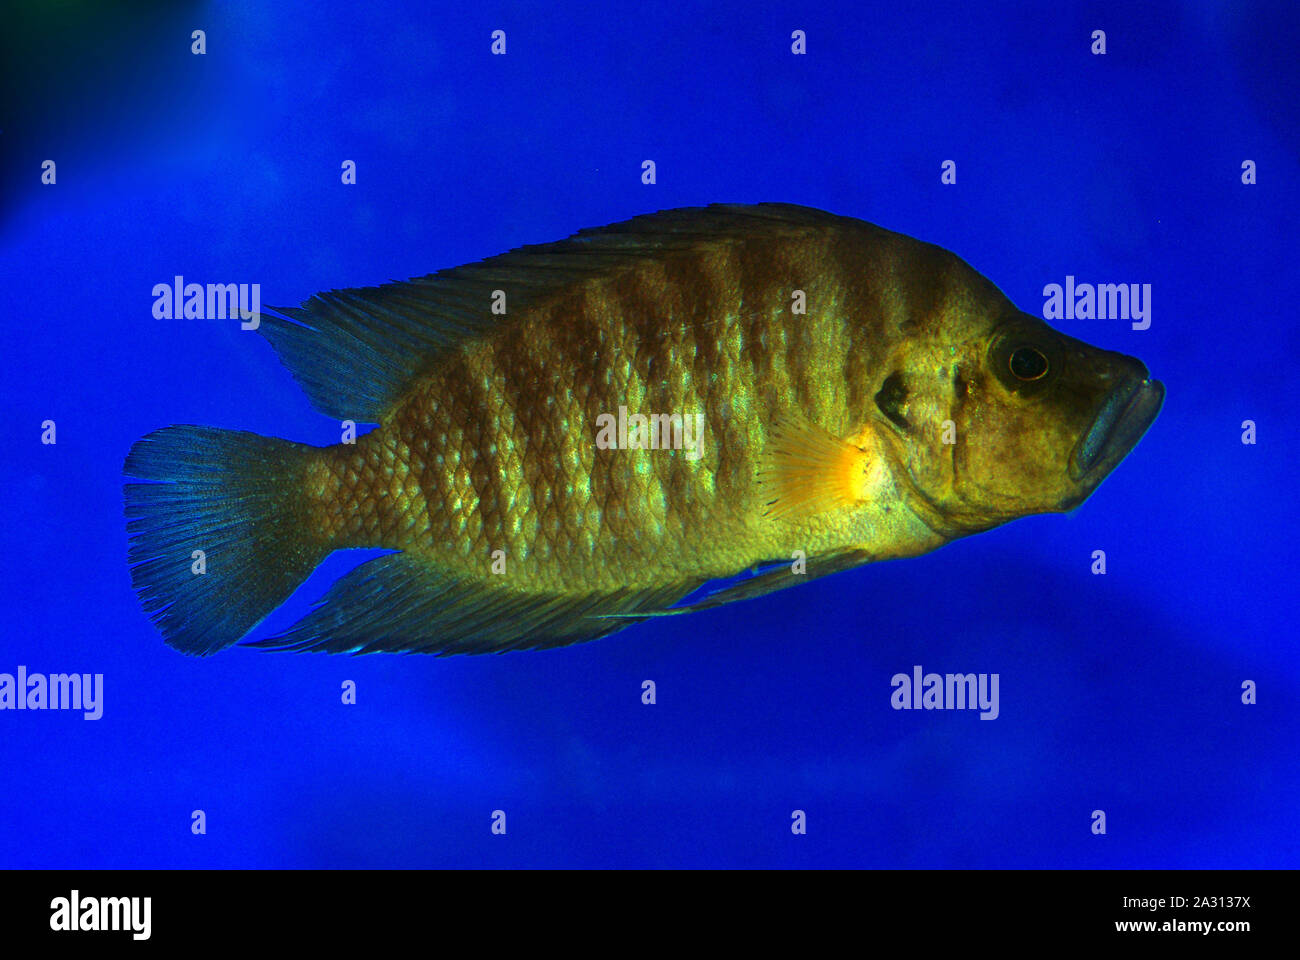 Pearly calvus or Compressed cichlid, Altolamprologus calvus 'gold' Stock Photo